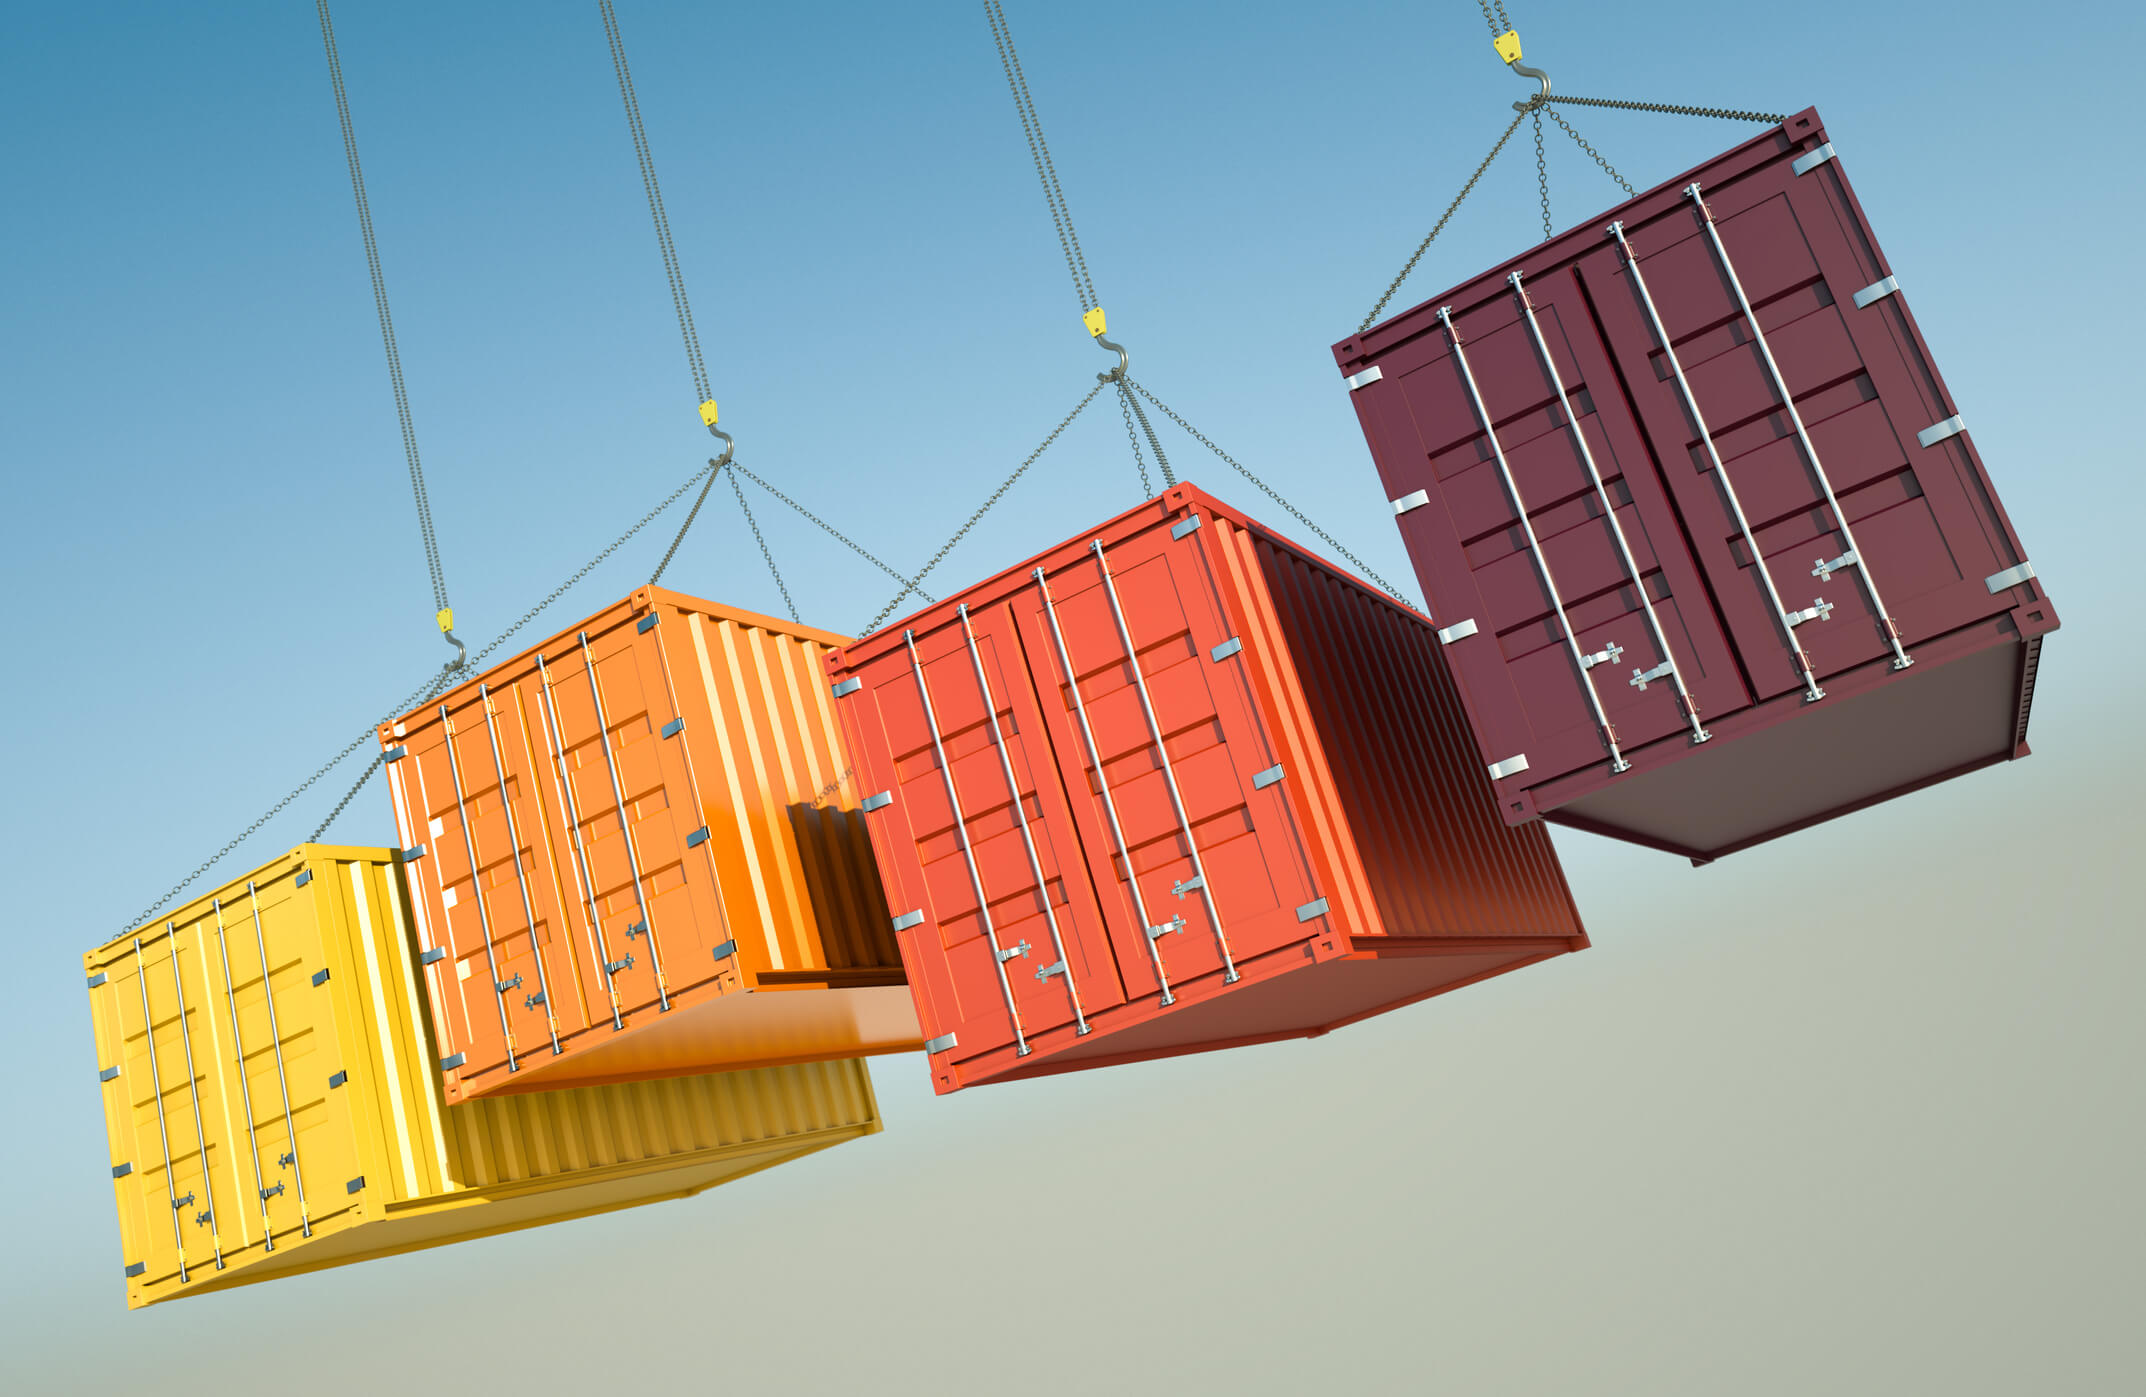 What can you fit in container storage, Blog